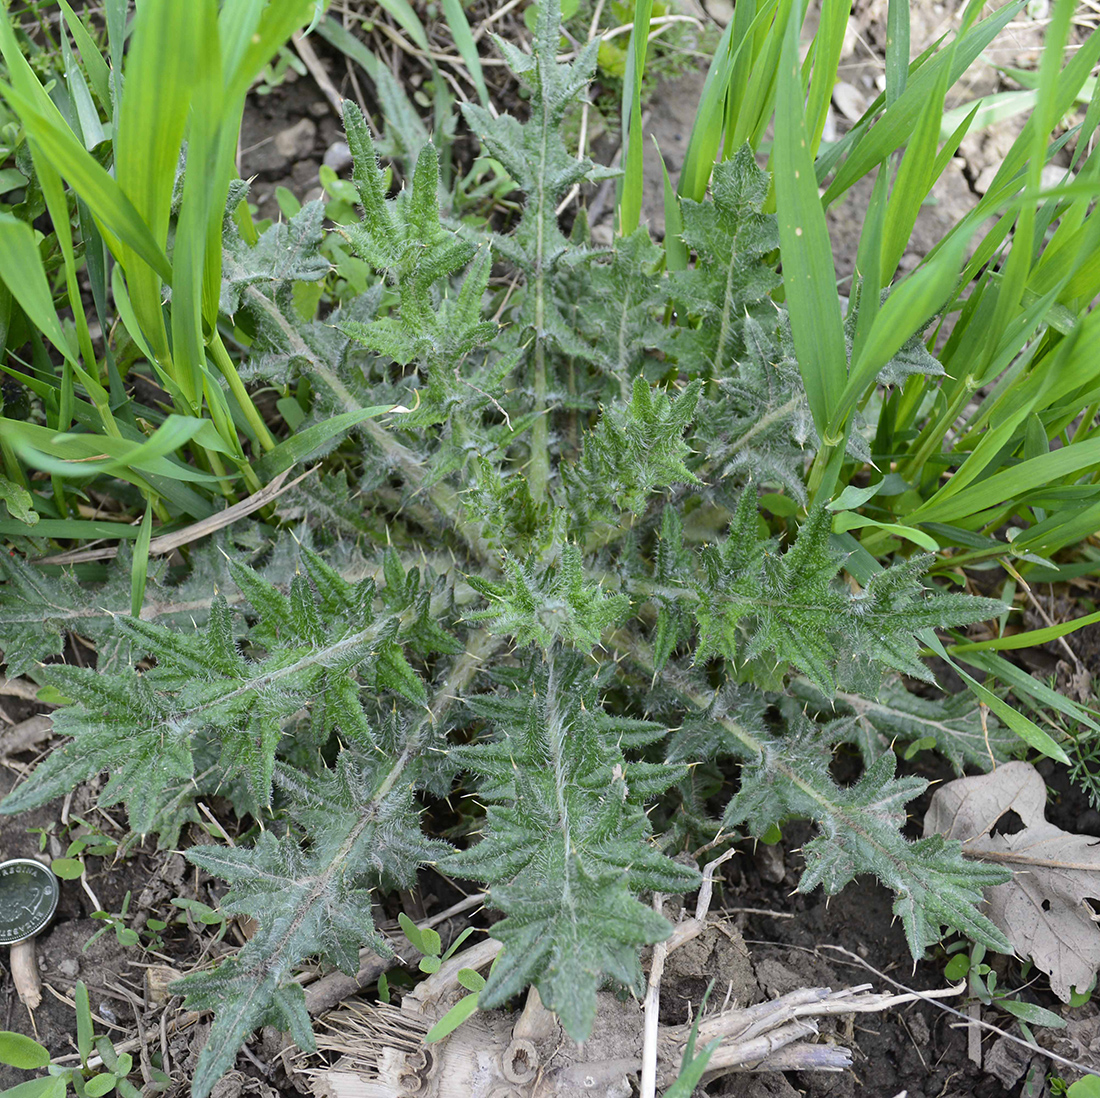 An established second year rosette with dark green leaves, fuzzy surface and spiny margins